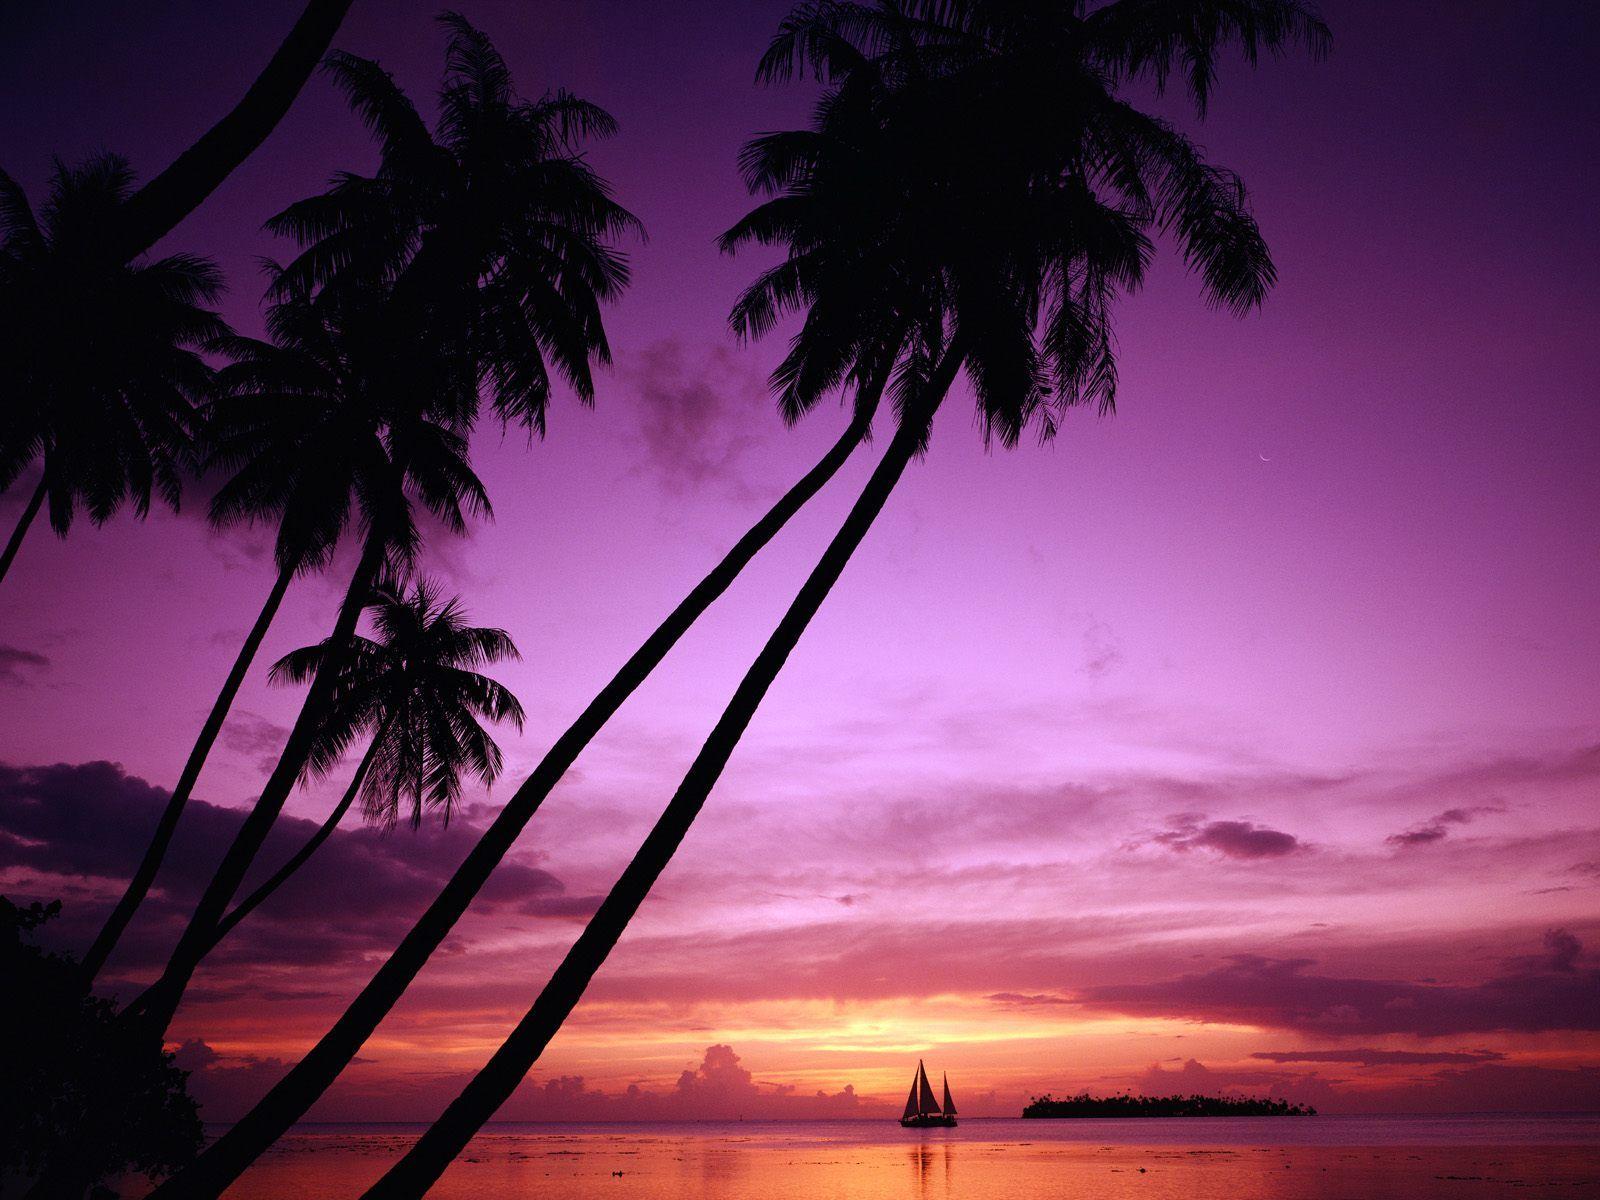 Tropical Paradise Background. You are in: Picture > Wallpaper